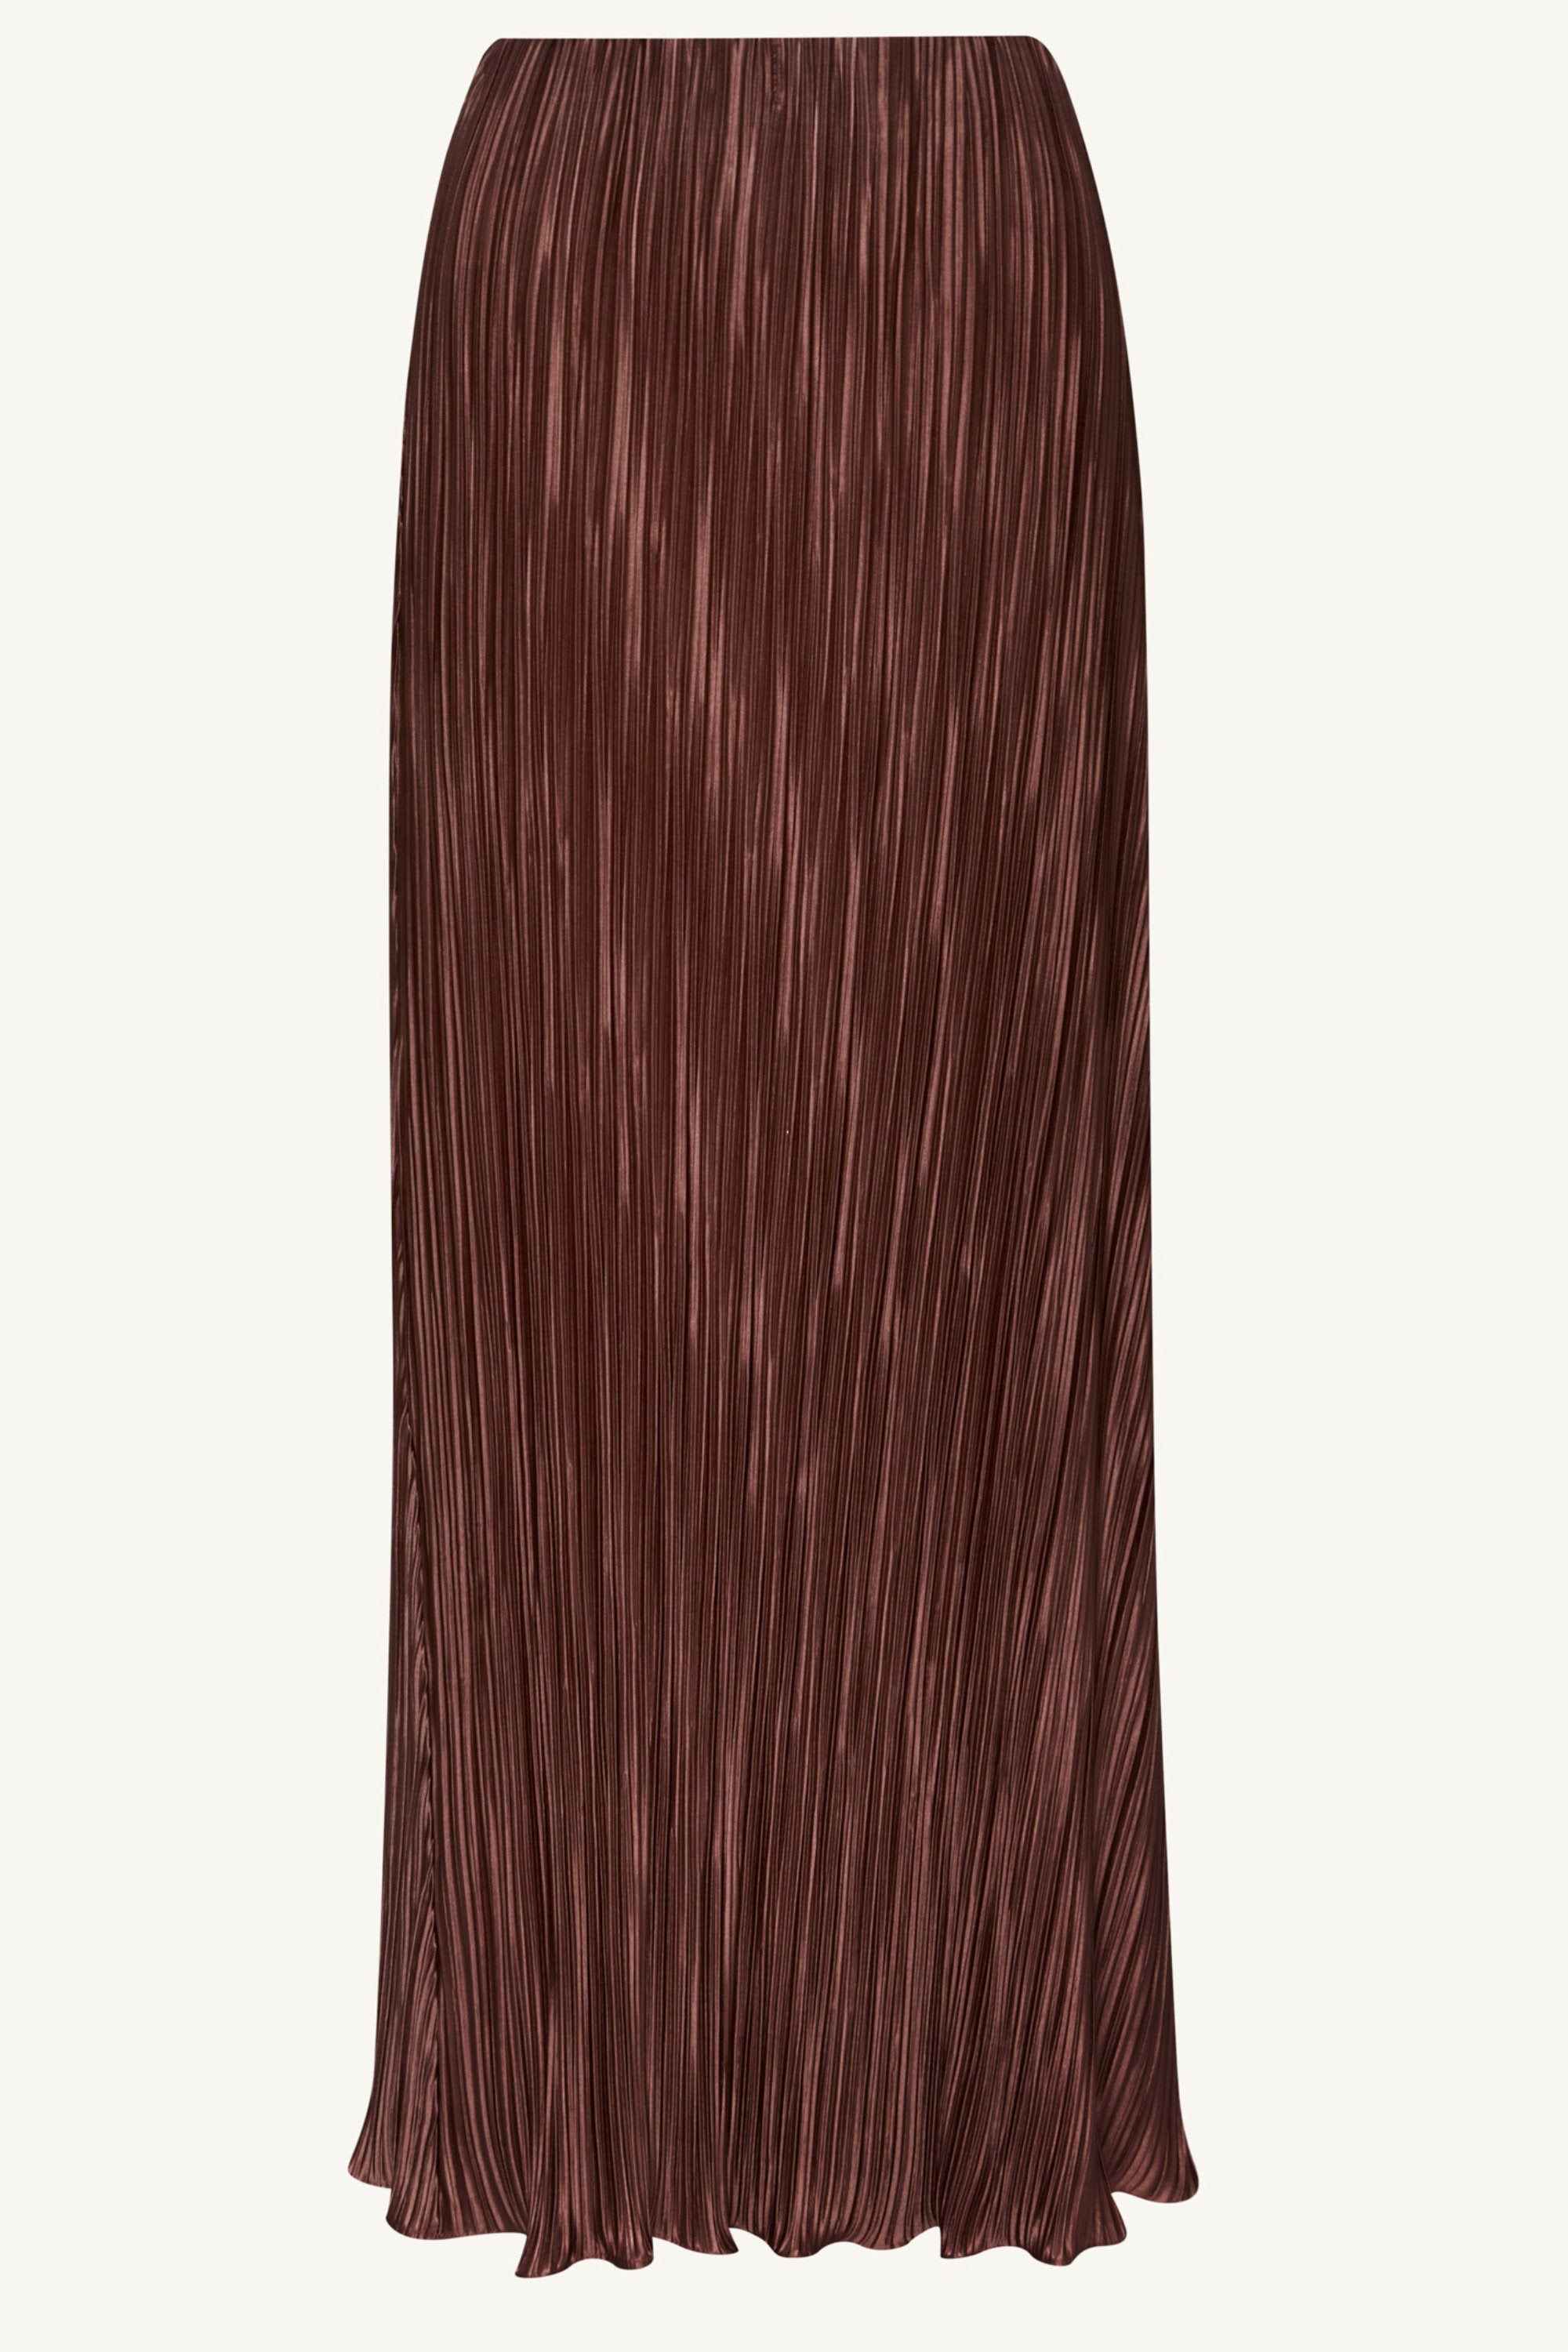 Satin Plisse Side Rouched Maxi Skirt - Chocolate Clothing epschoolboard 